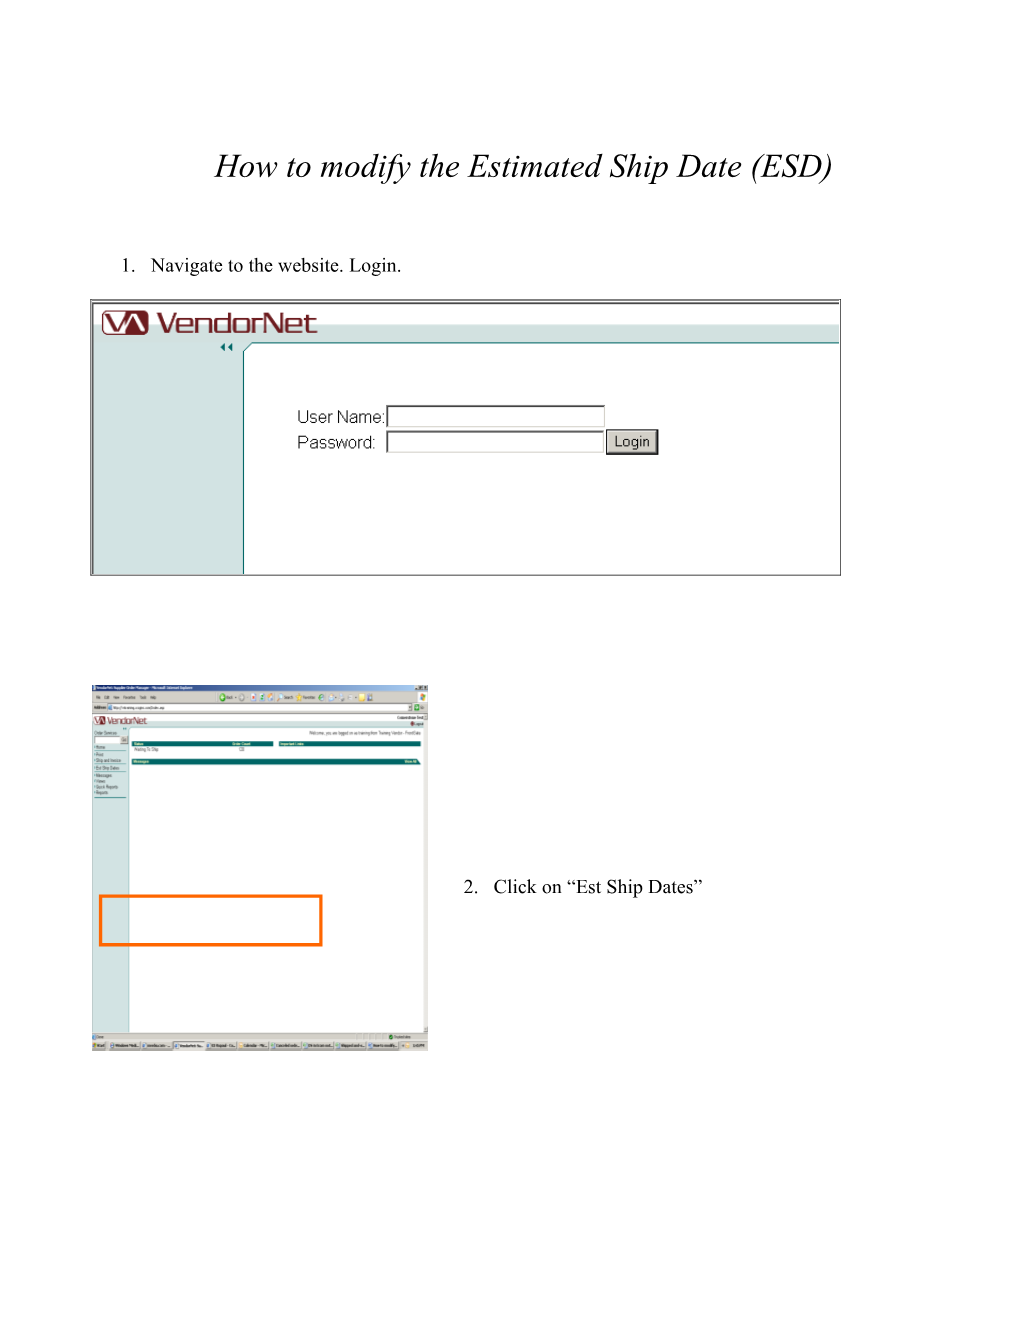 How to Utilize the Estimated Ship Date (ESD) Function